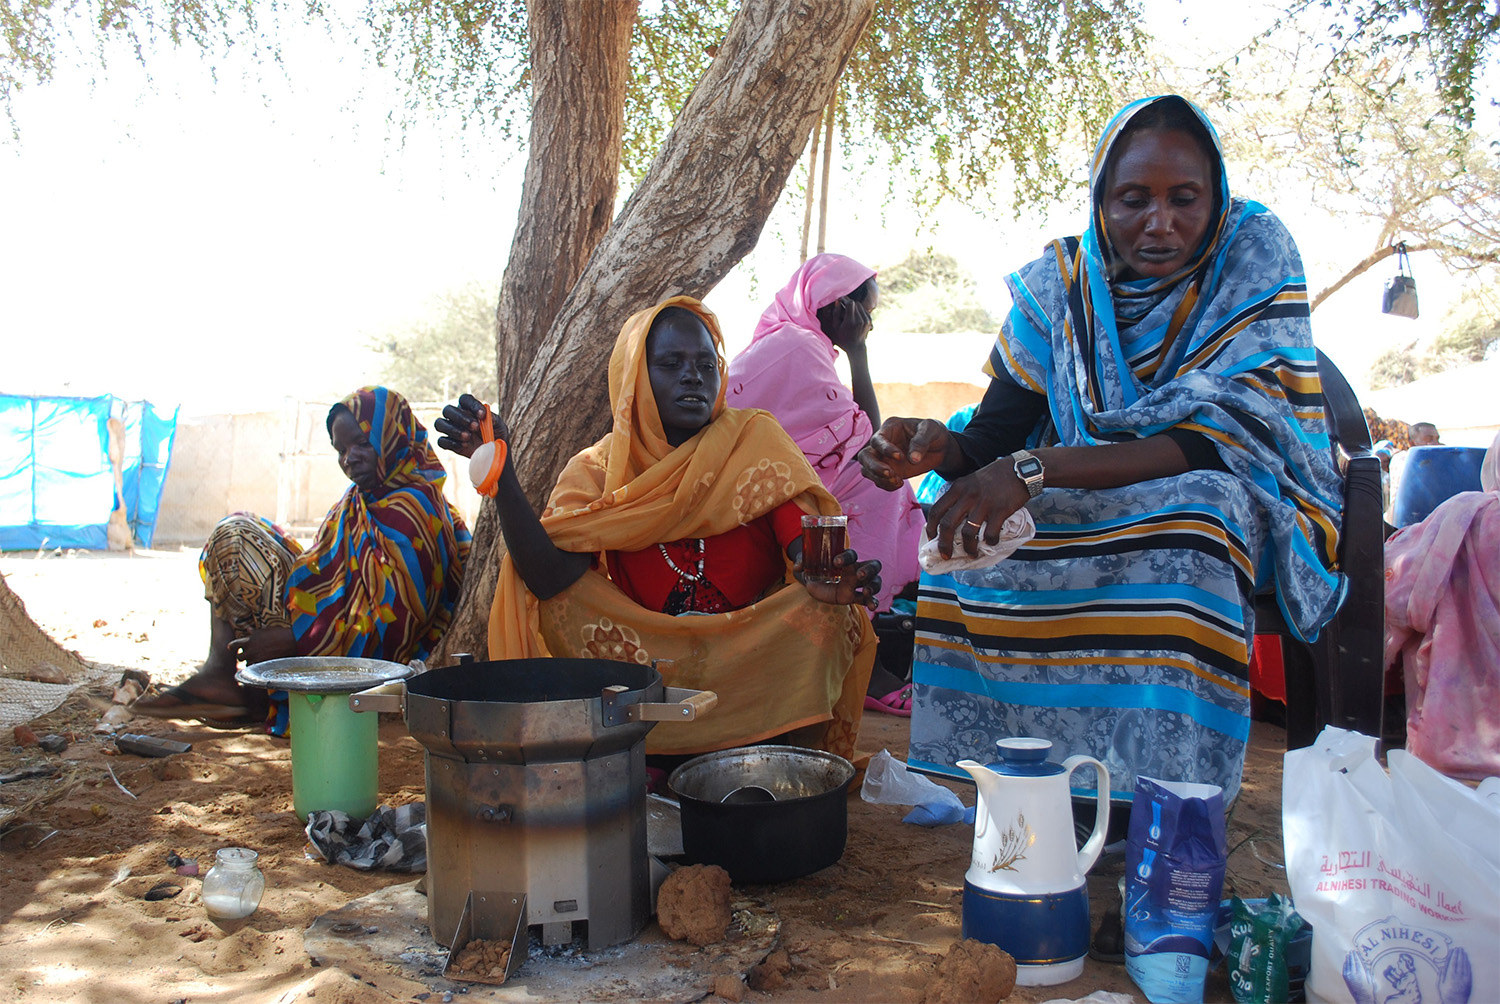 Women in traditional clothing sitting and making tea outdoors with the Berkeley-Darfur Stove.